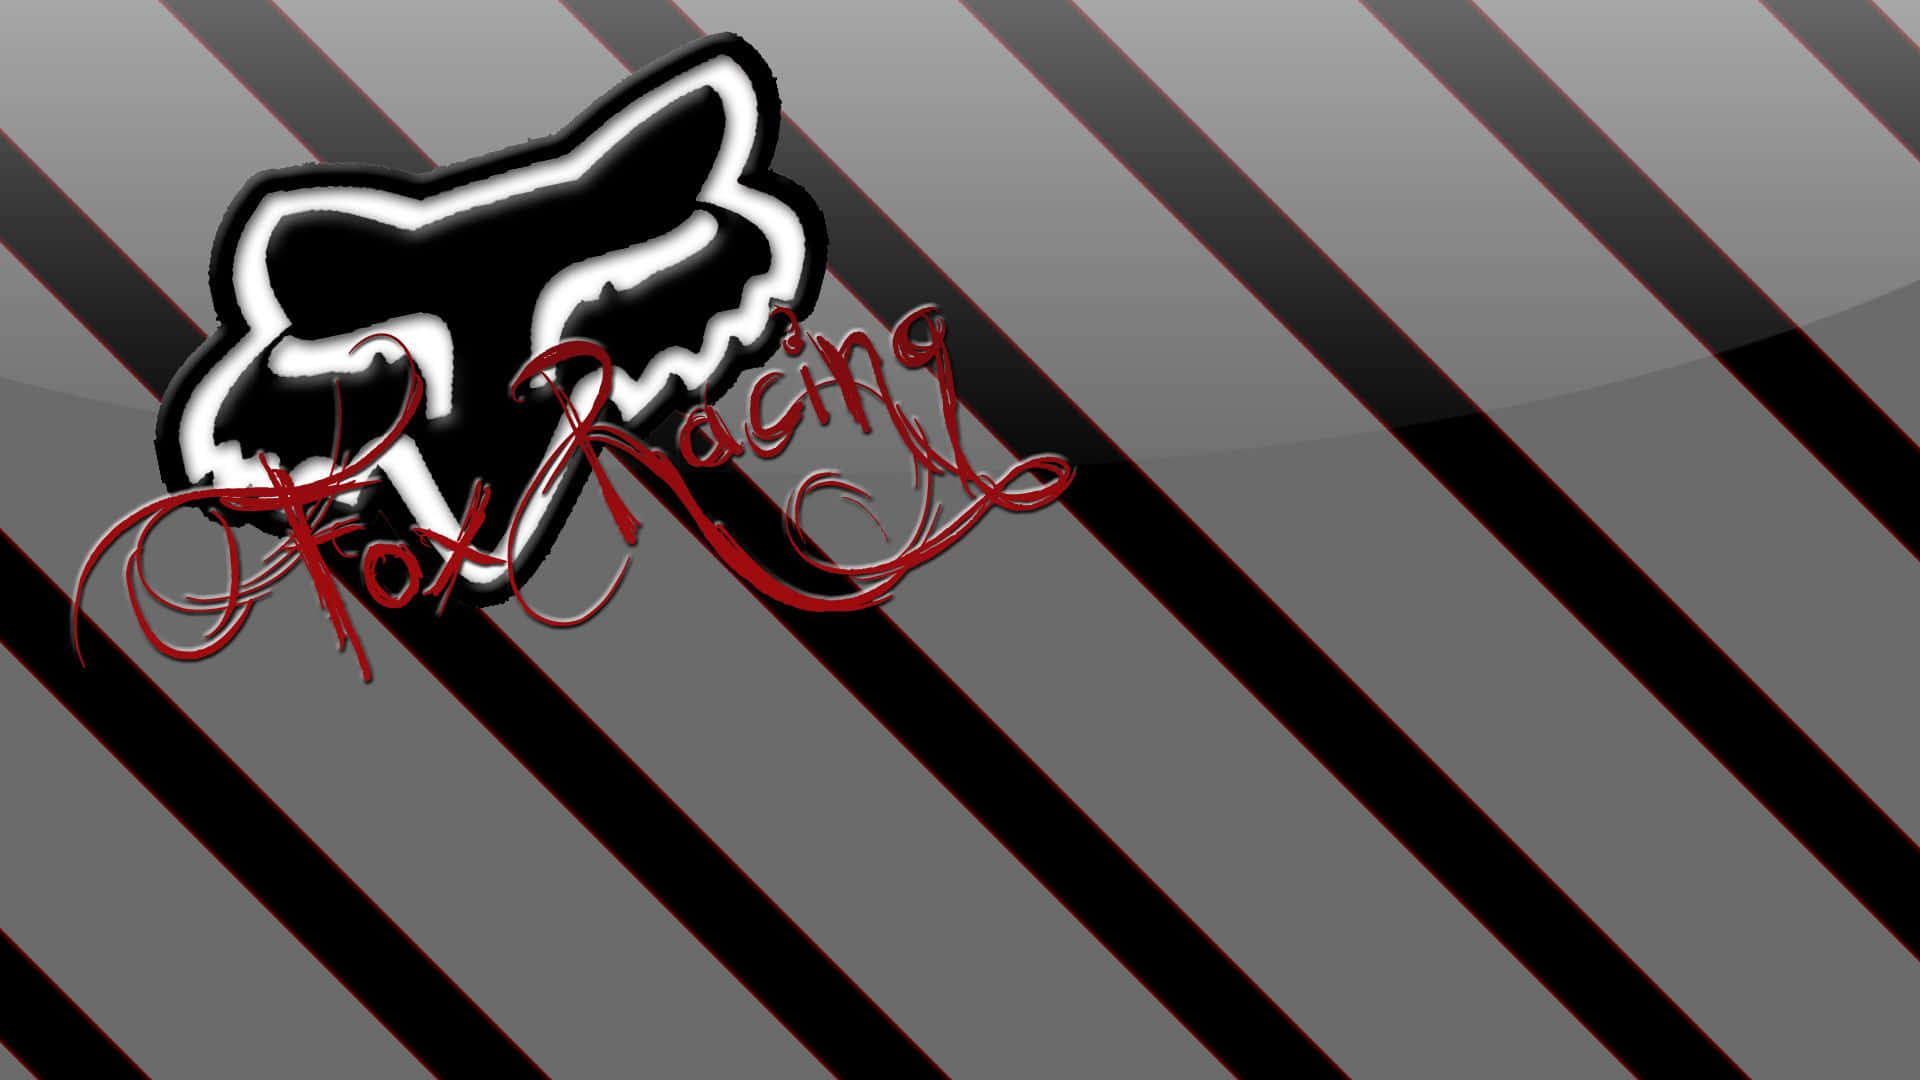 fox racing backgrounds for laptops